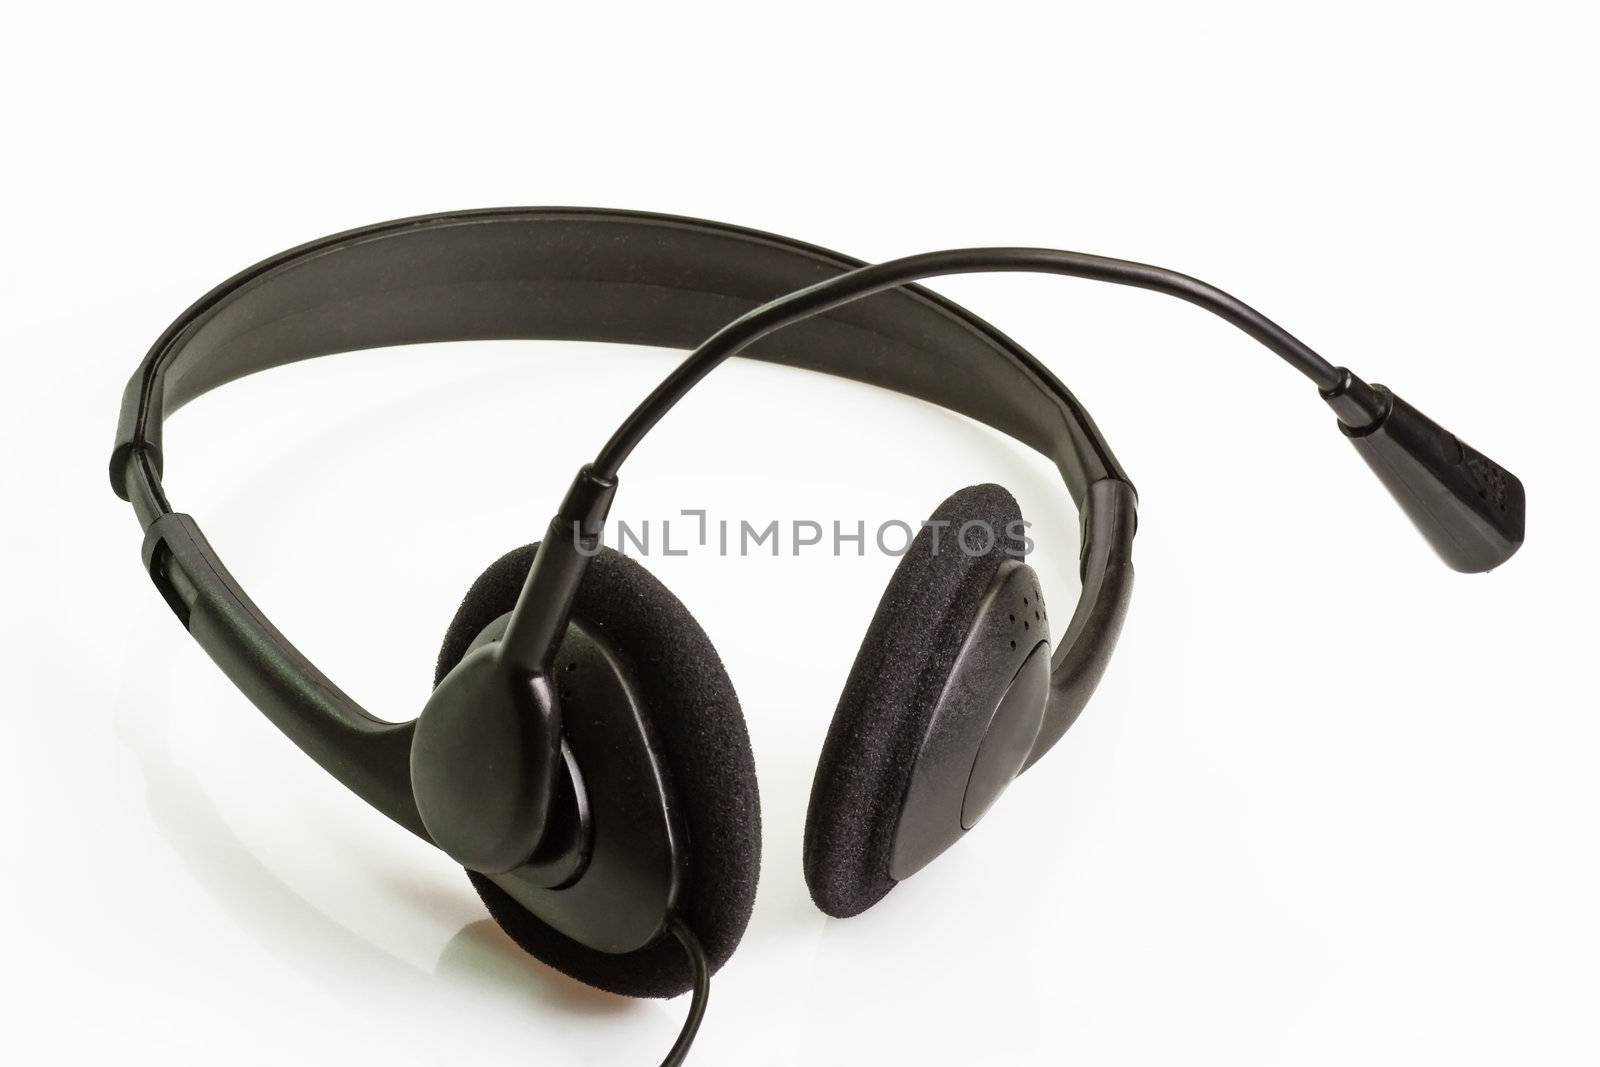 A computer headset on bright background.
